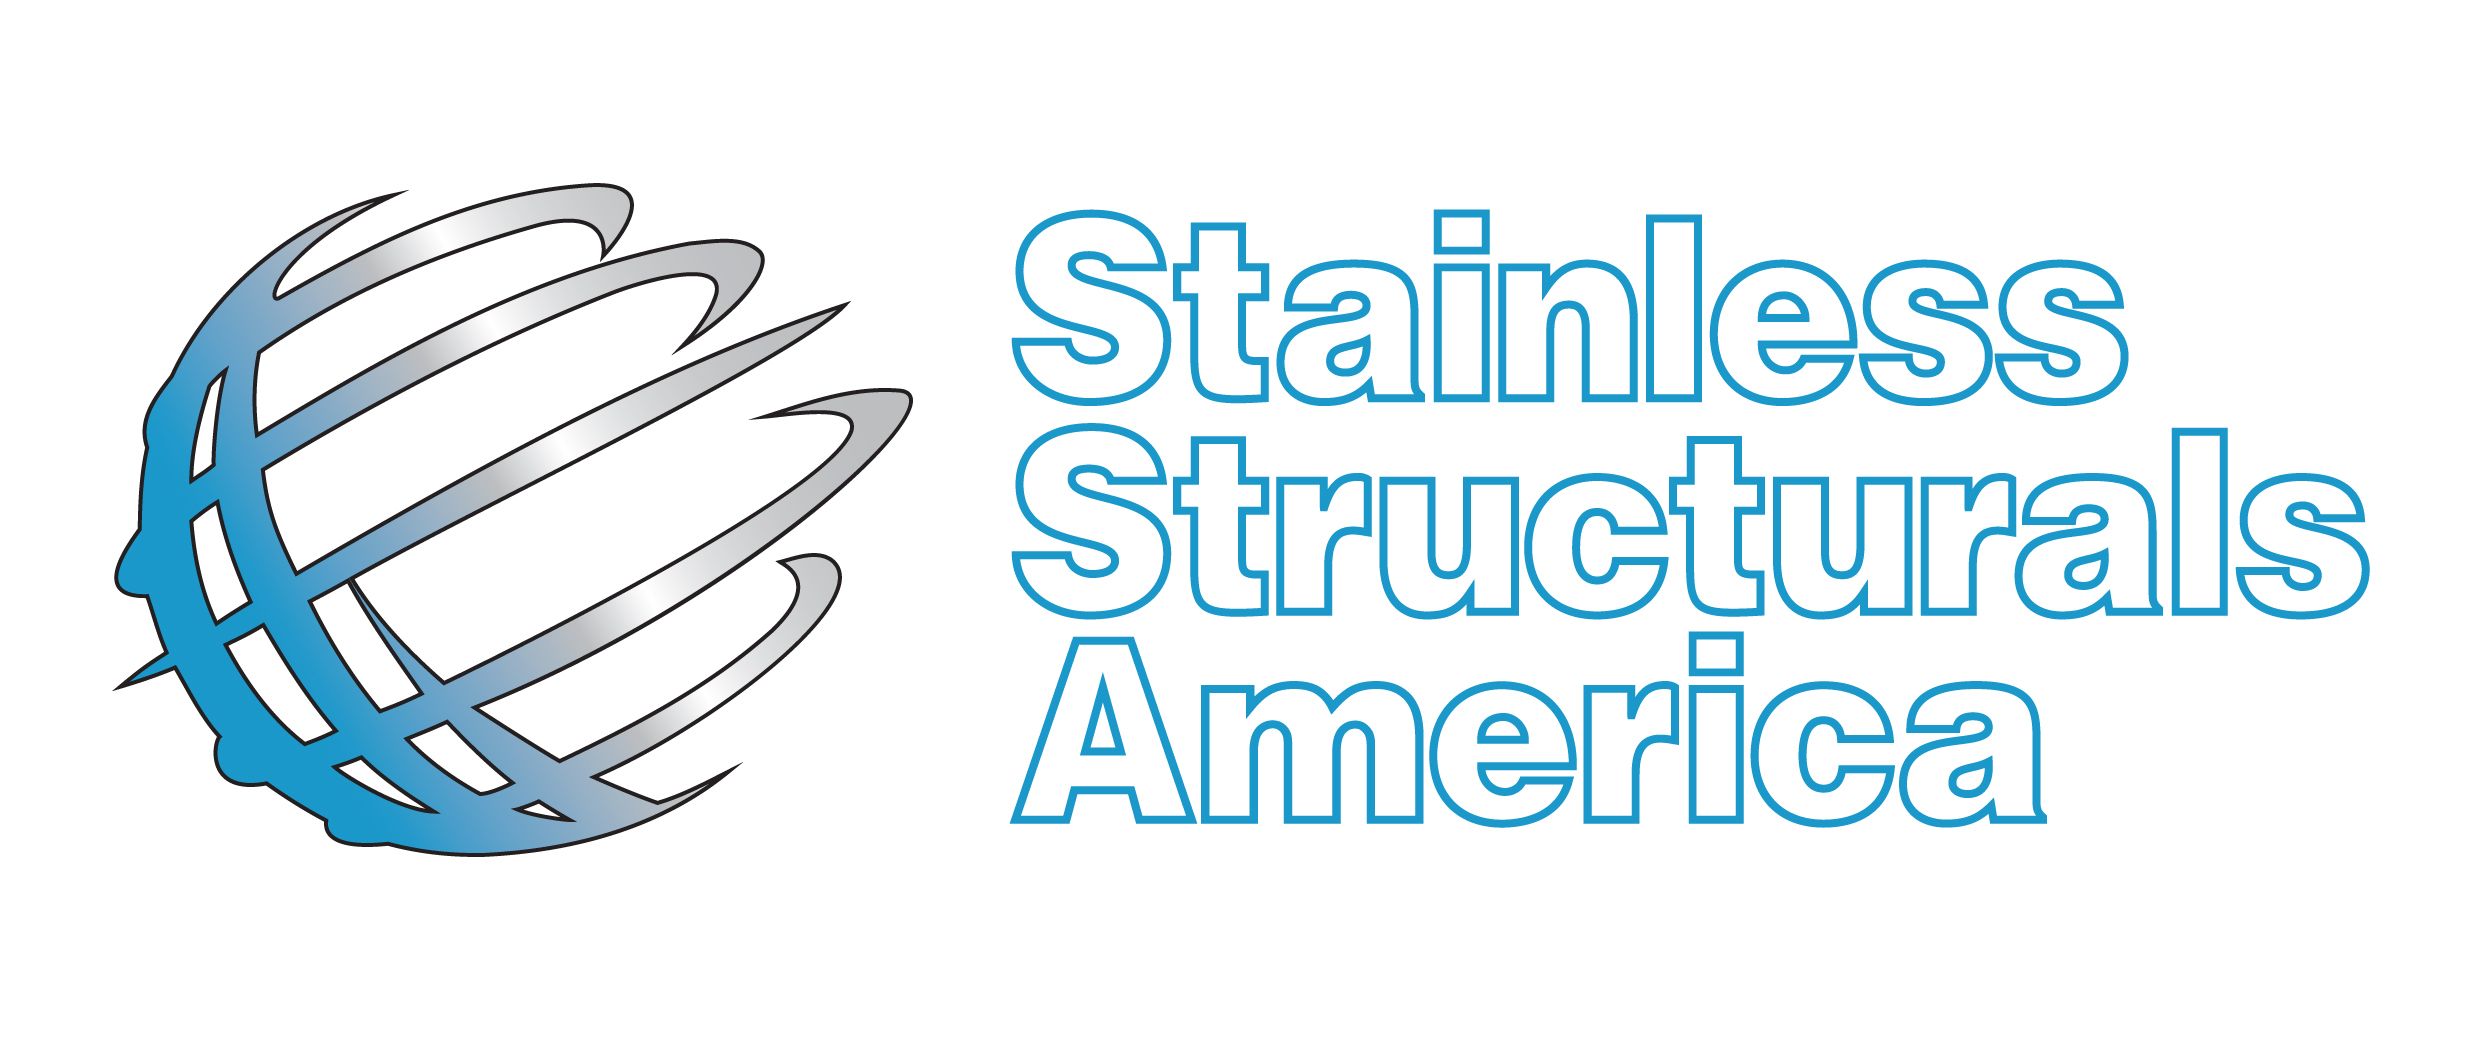 Stainless Structurals America